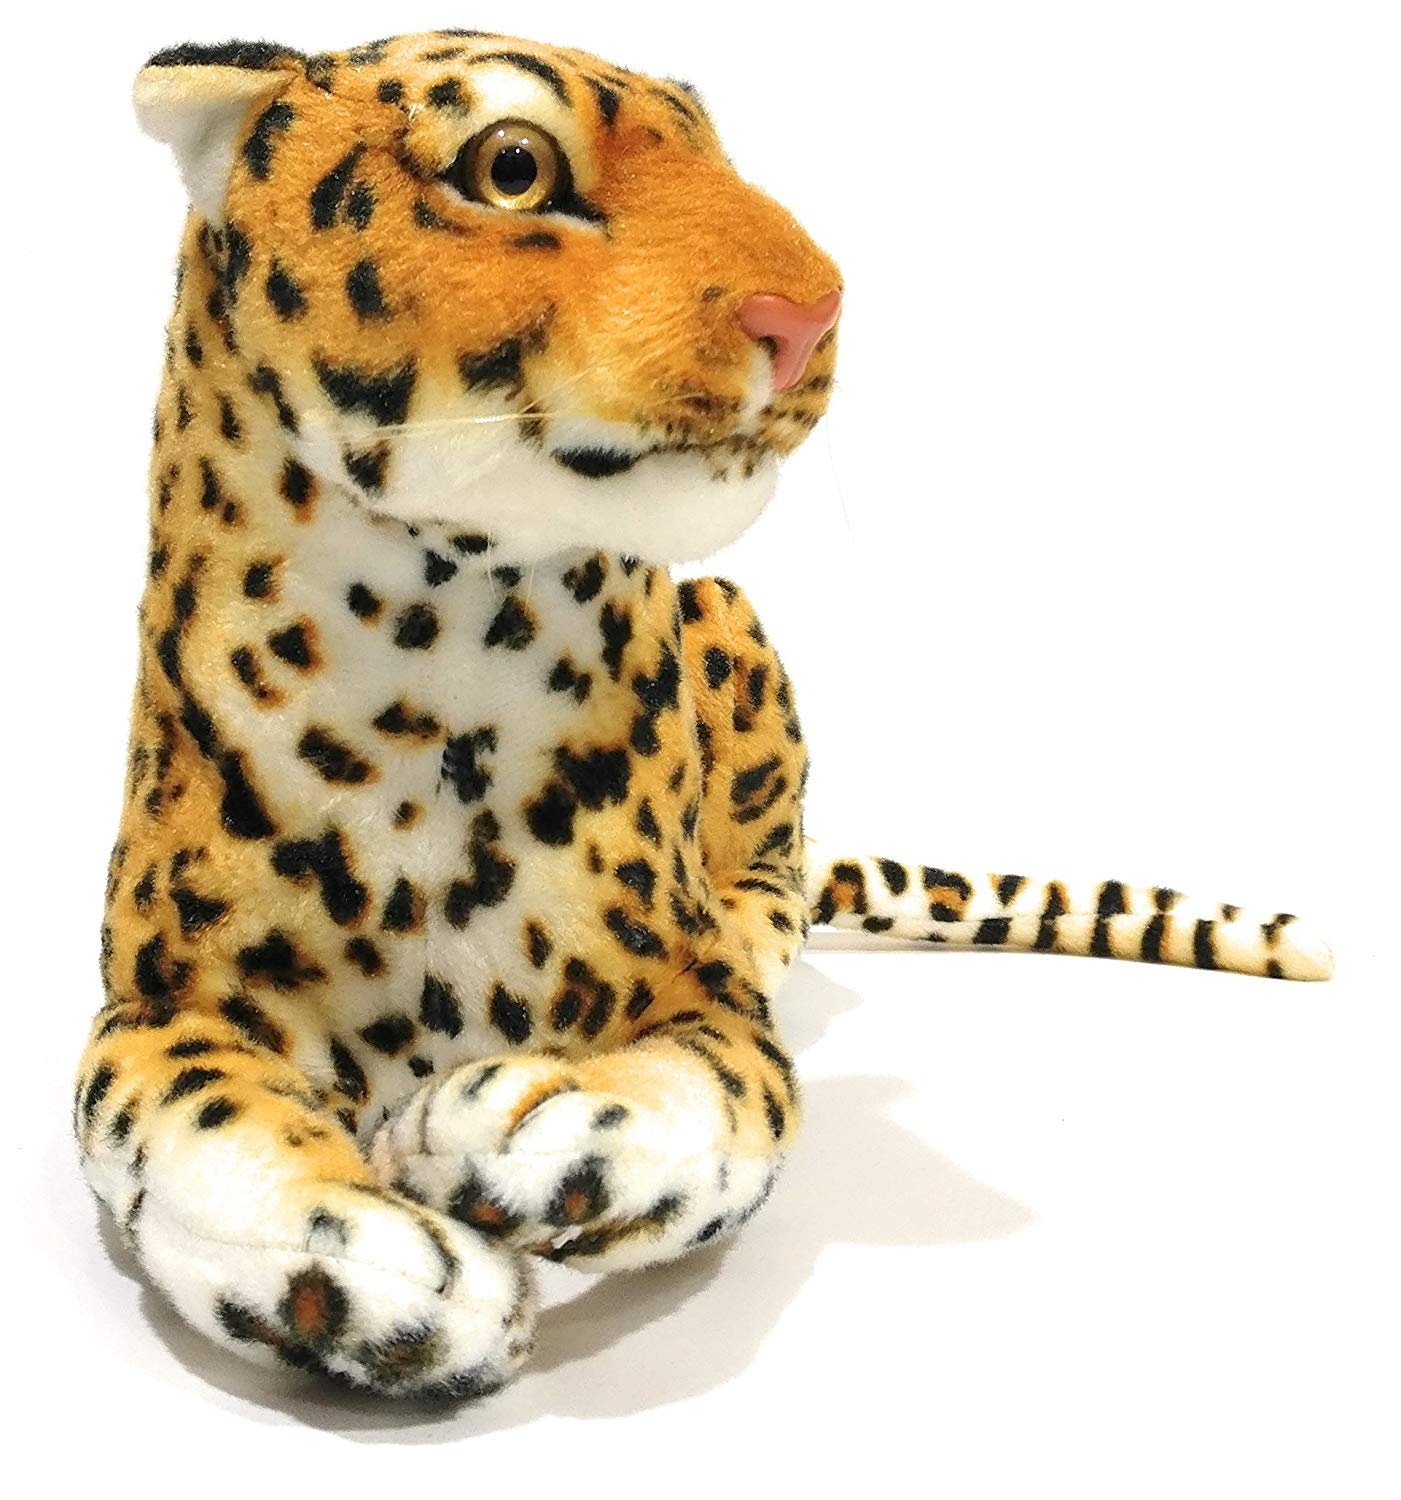 FunkyTradition Disney's The Tiger aka Sher khan Brown Brave Tiger Stuffed Soft Plush Toy For Kids 25 cm Tall - FunkyTradition